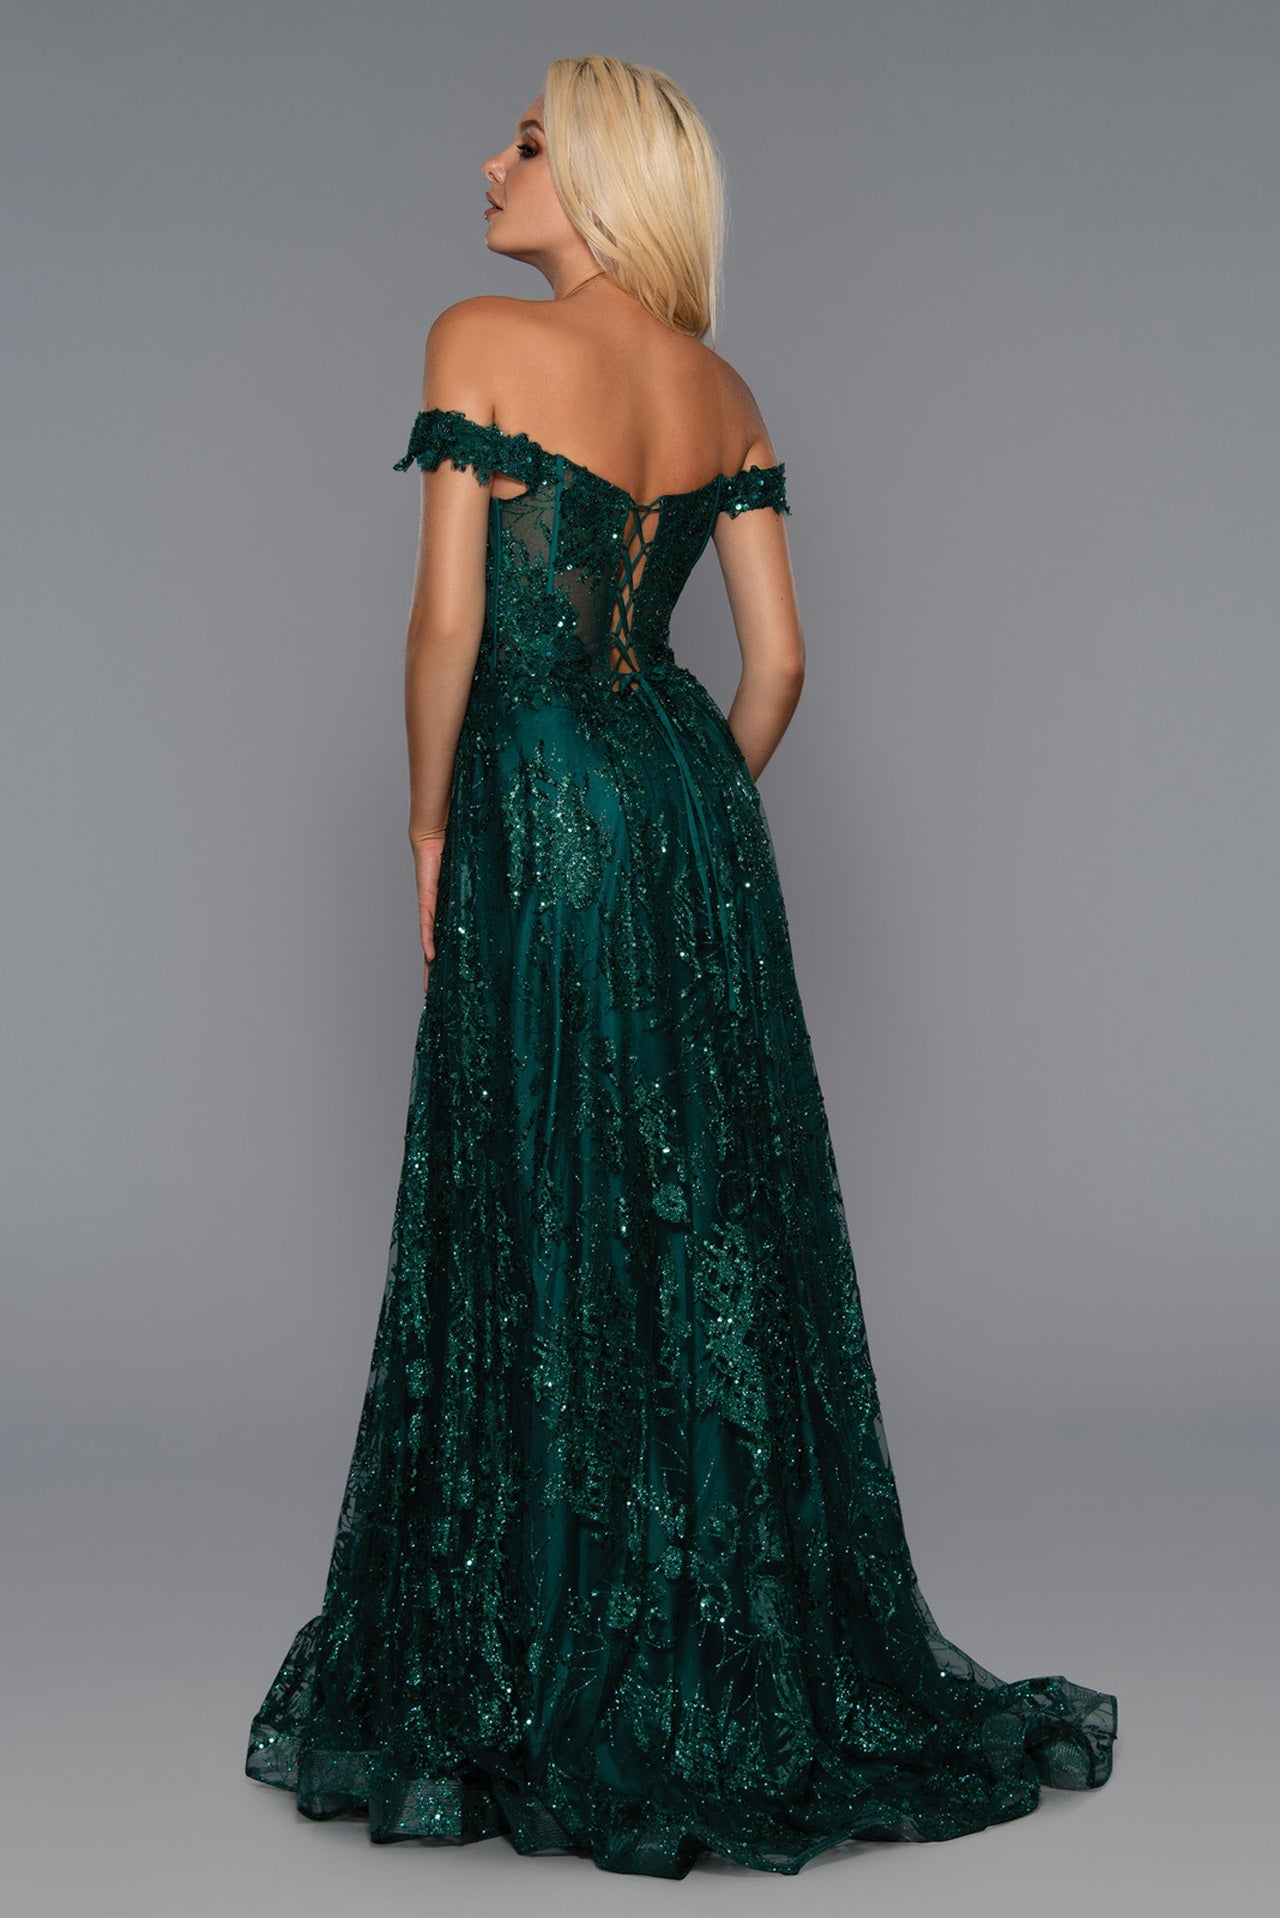 Stella Couture 21064 is a long a line formal prom and pageant dress. Featuring a plunging deep V Neckline with a sheer embellished bodice and off the shoulder straps. high slit in skirt. lace up corset back. Great for any formal event.  Available Size: 0-18  Available Color: Emerald, Rose Gold, Royal